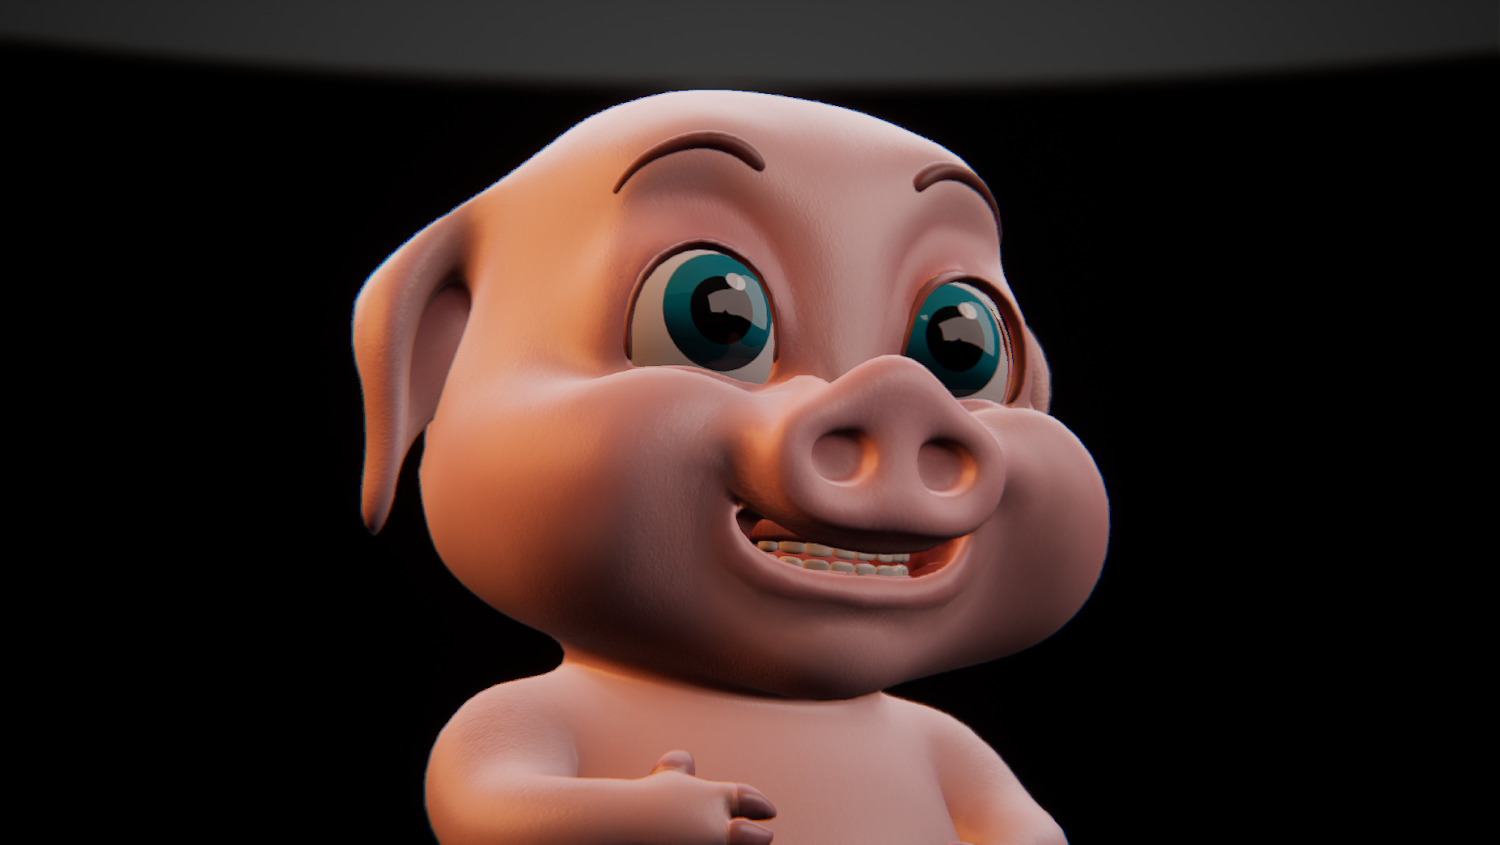 Piggy in Characters - UE Marketplace